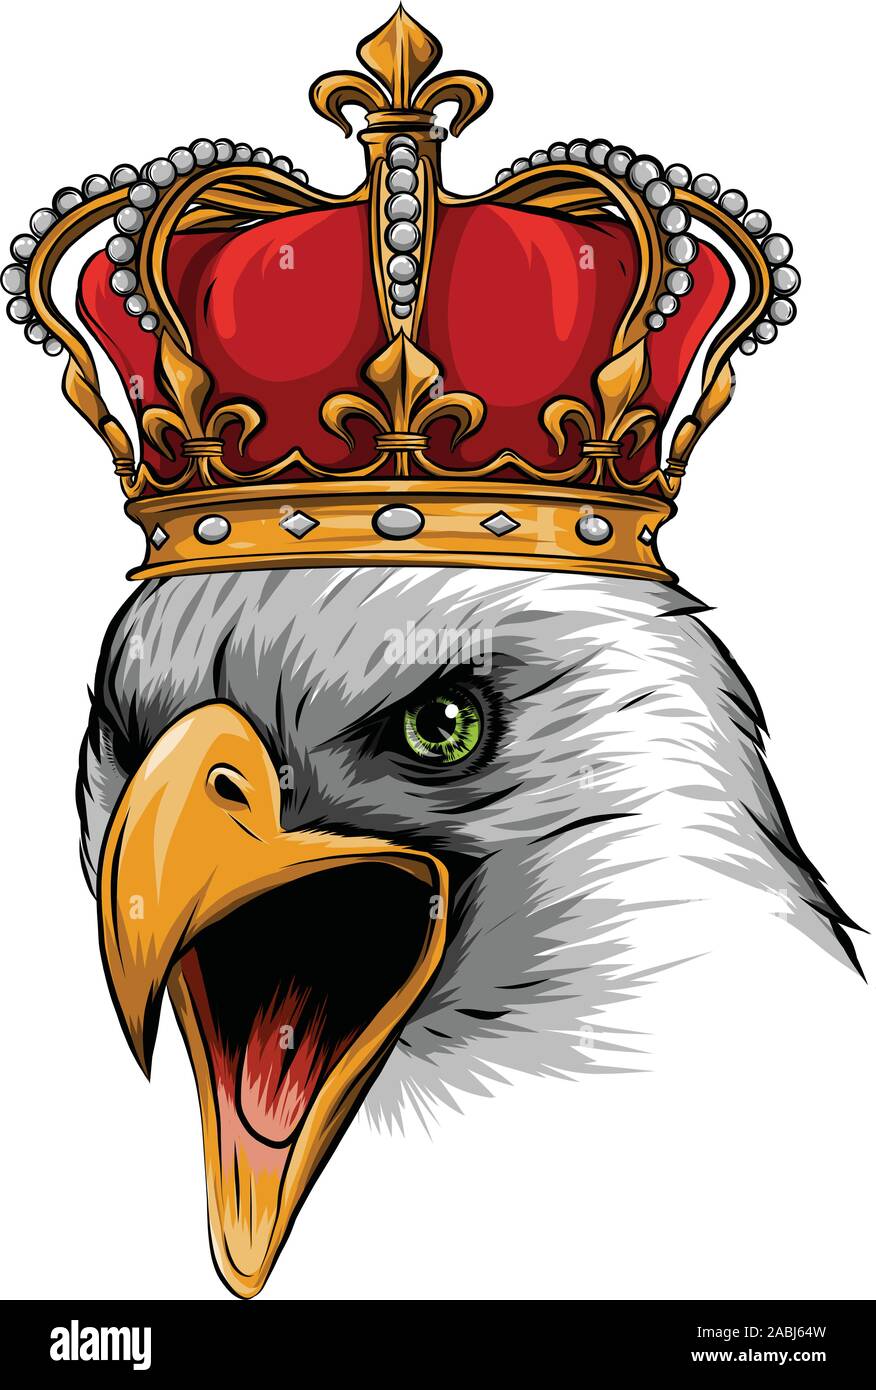 Eagle head with crown logo template, silhouette hawk mascot graphic, wall  mural • murals bird of prey, nobility, identity | myloview.com